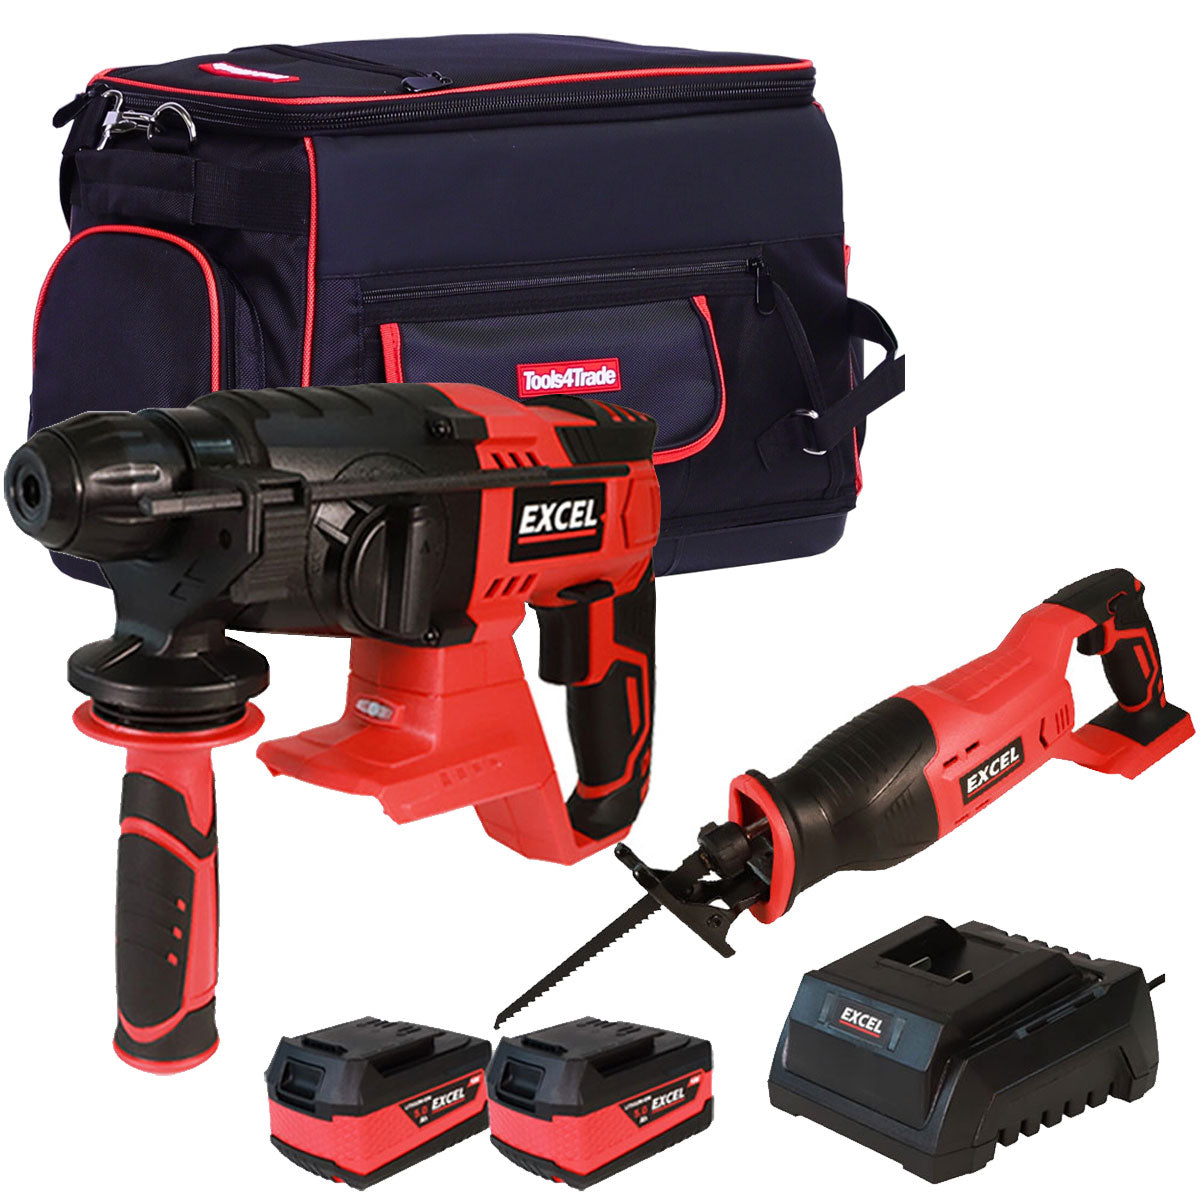 Excel 18V Cordless Twin Pack with 2 x 5.0Ah Batteries & Charger in Bag EXL5108